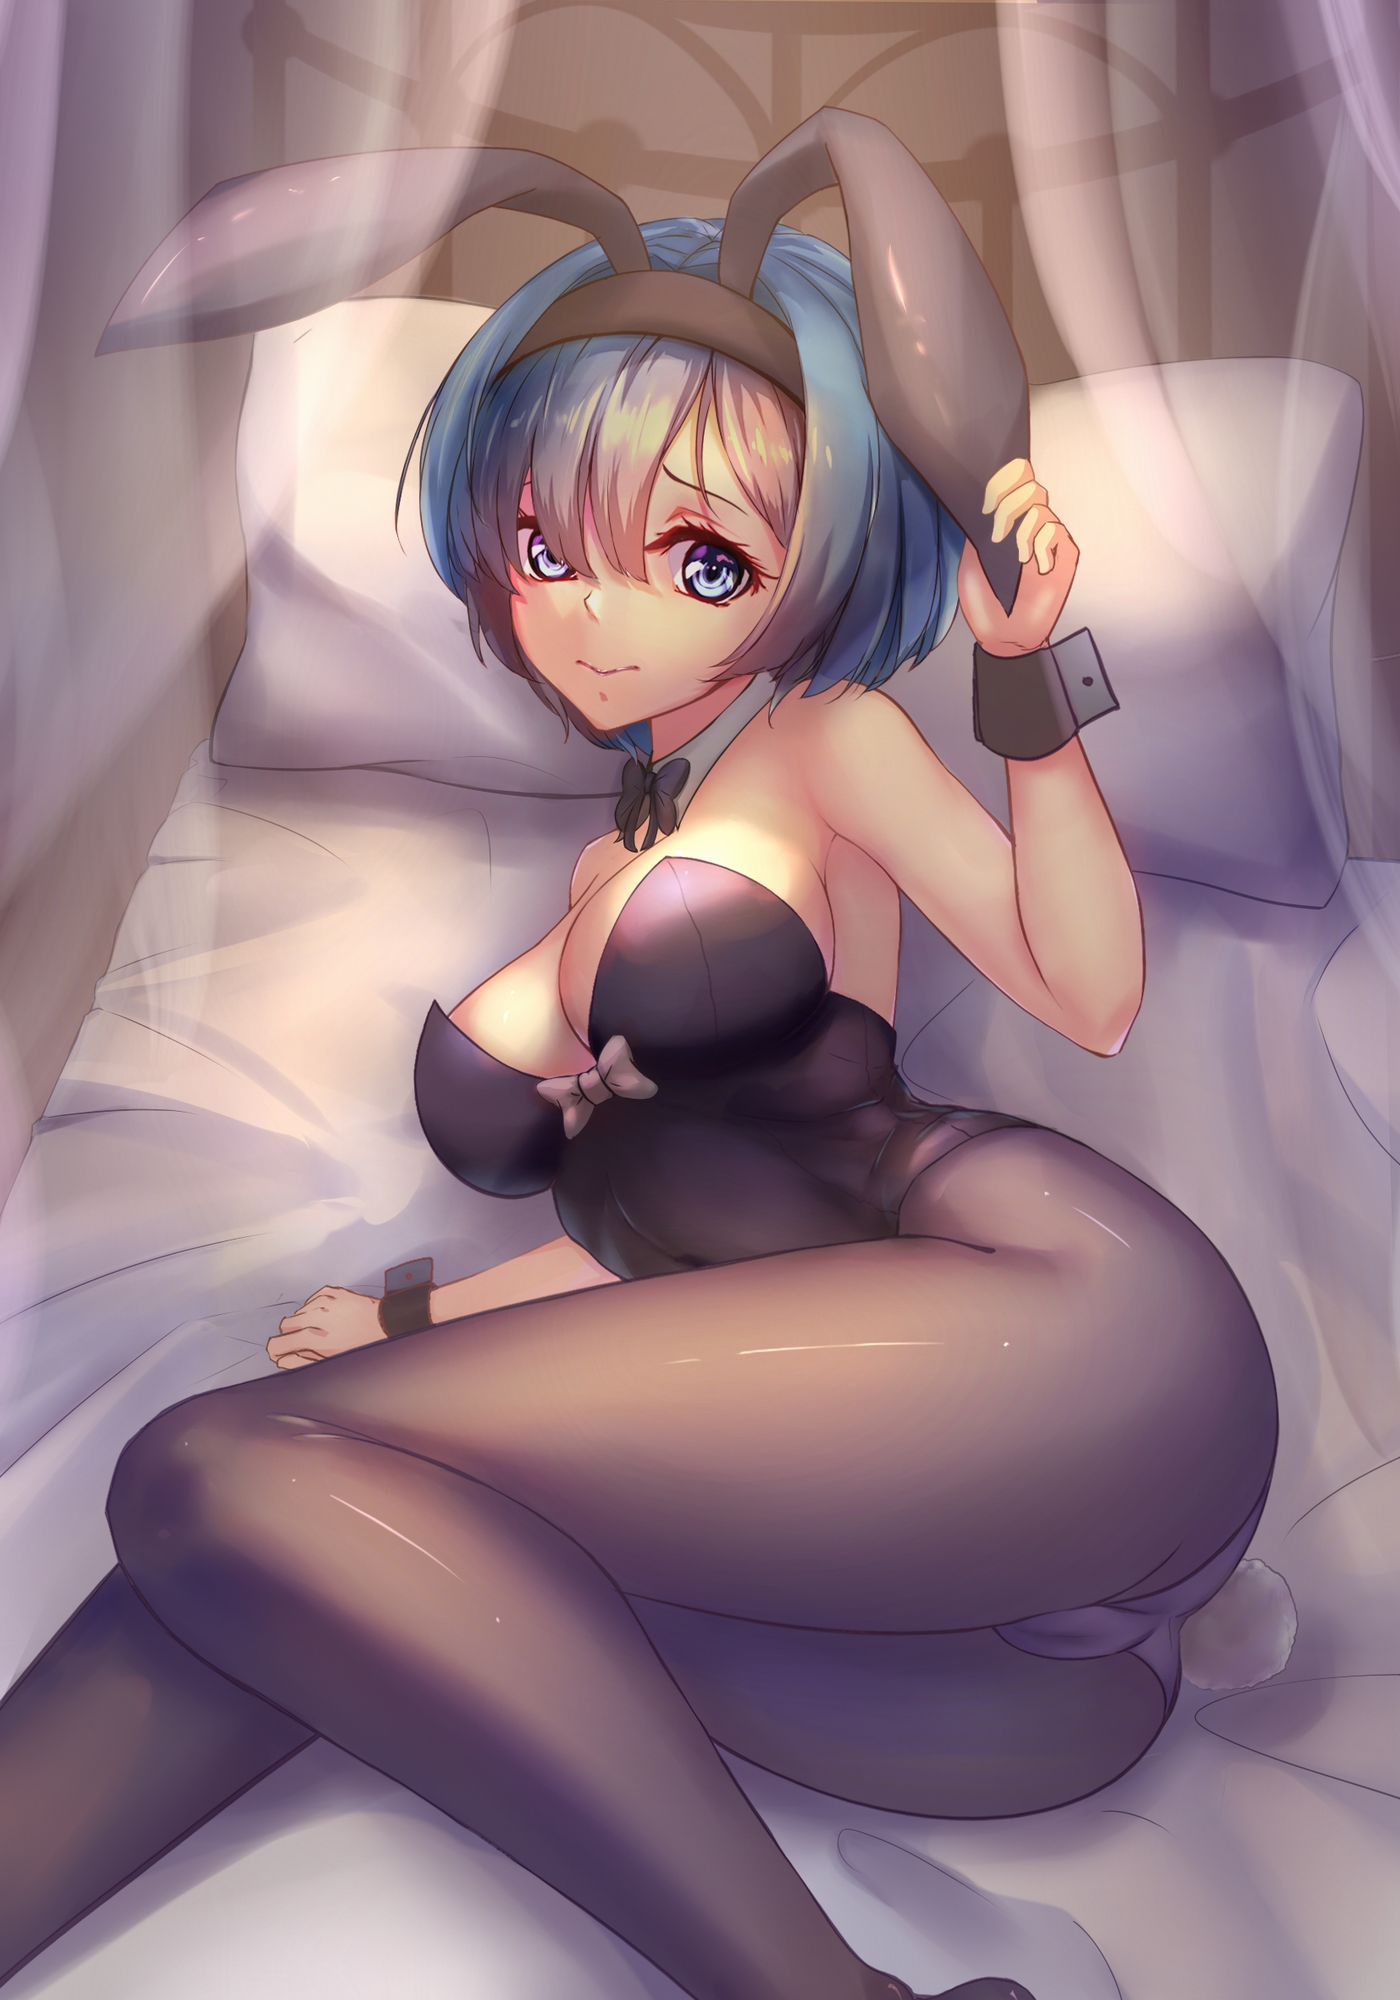 [Second] sexy bunny girl figure secondary erotic image part 32 [Bunny Girl] 6